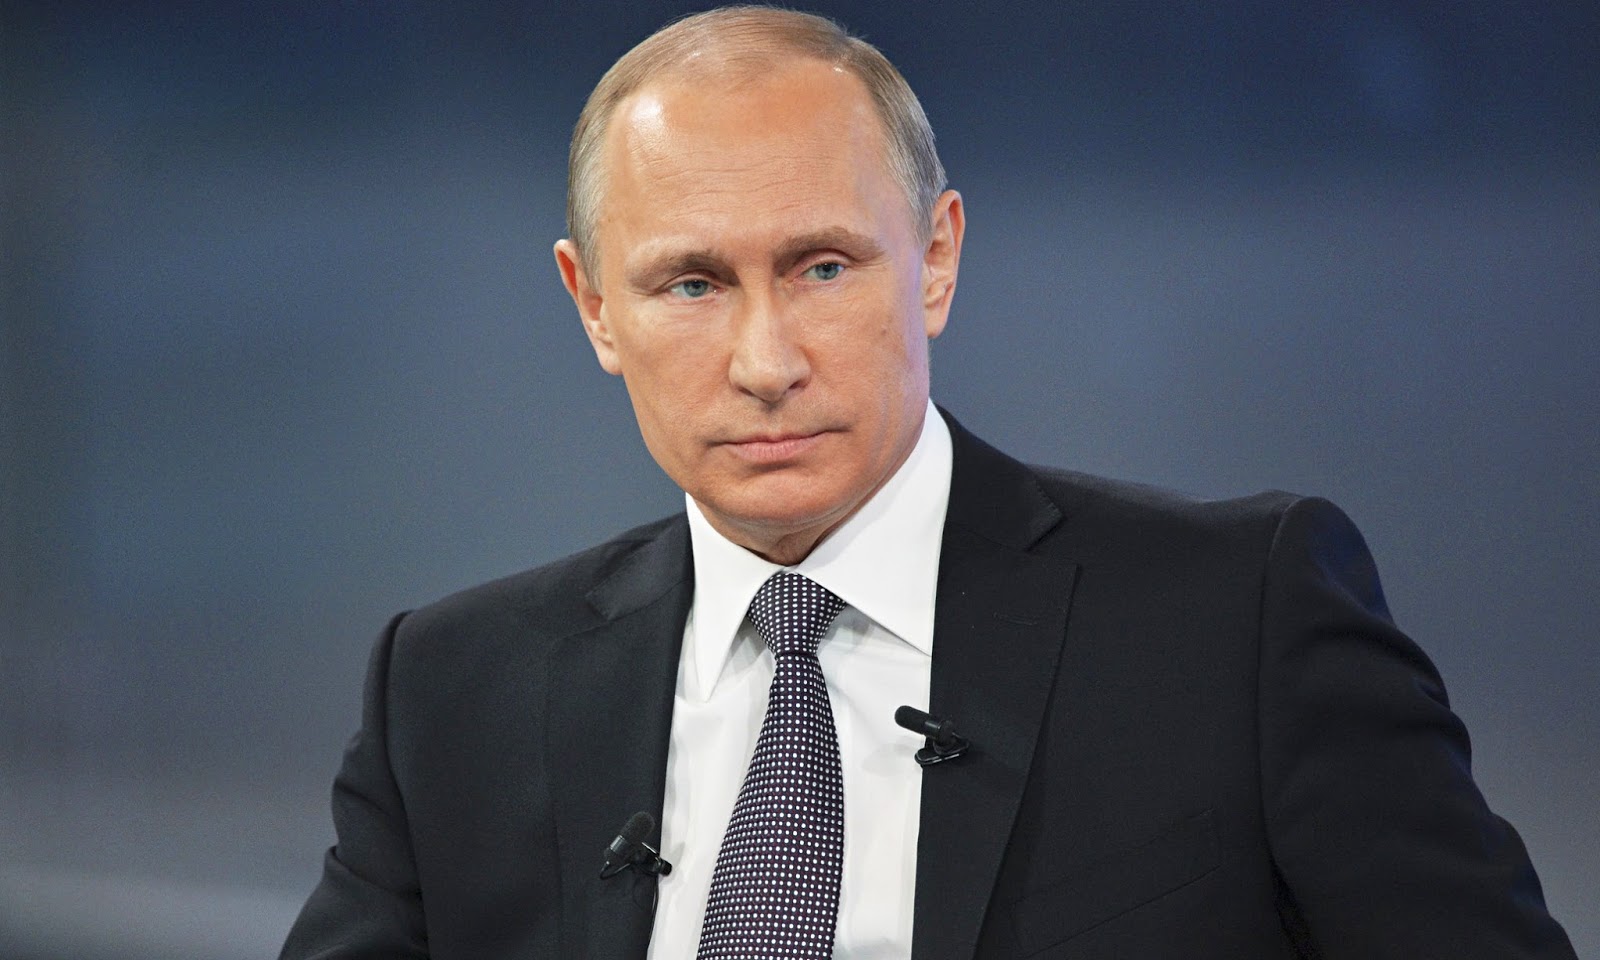 vladimir-putin-russian-president-hd-wallpapers-images-and-photos-soft-wallpapers